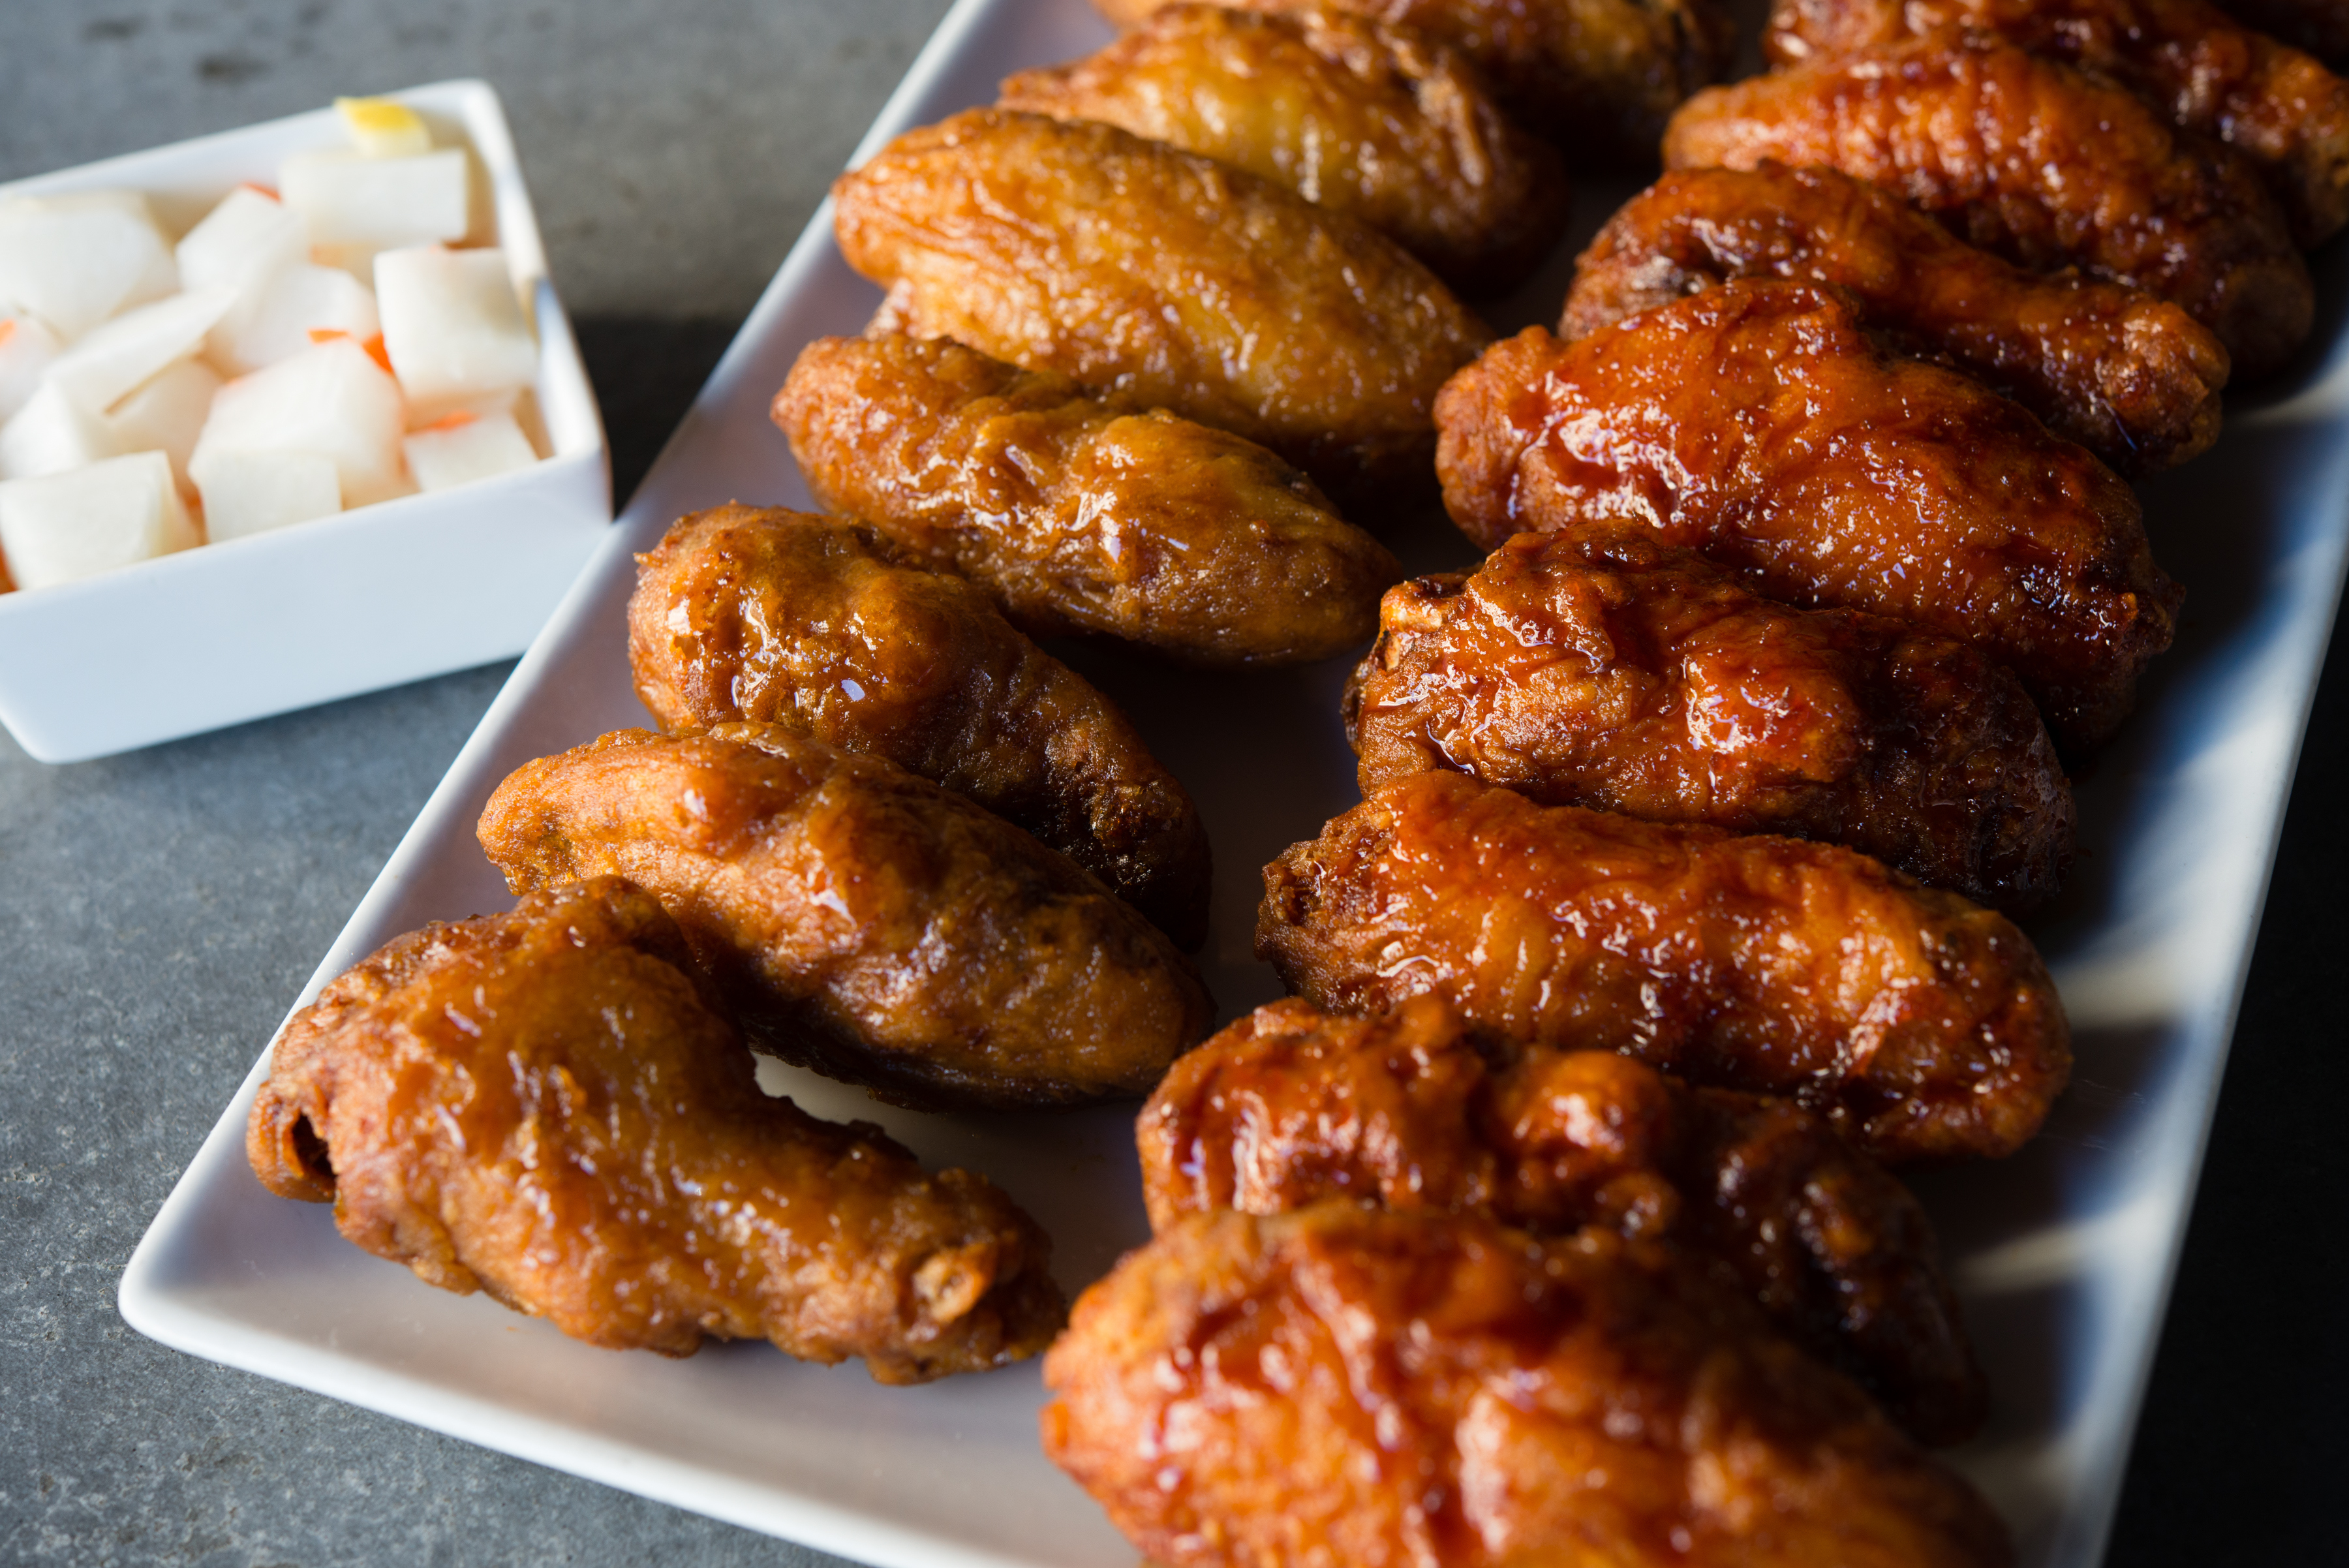 An order of Momo's Korean Fried Chicken wings are pictured. (Sarah L. Voisin—The Washington Post)